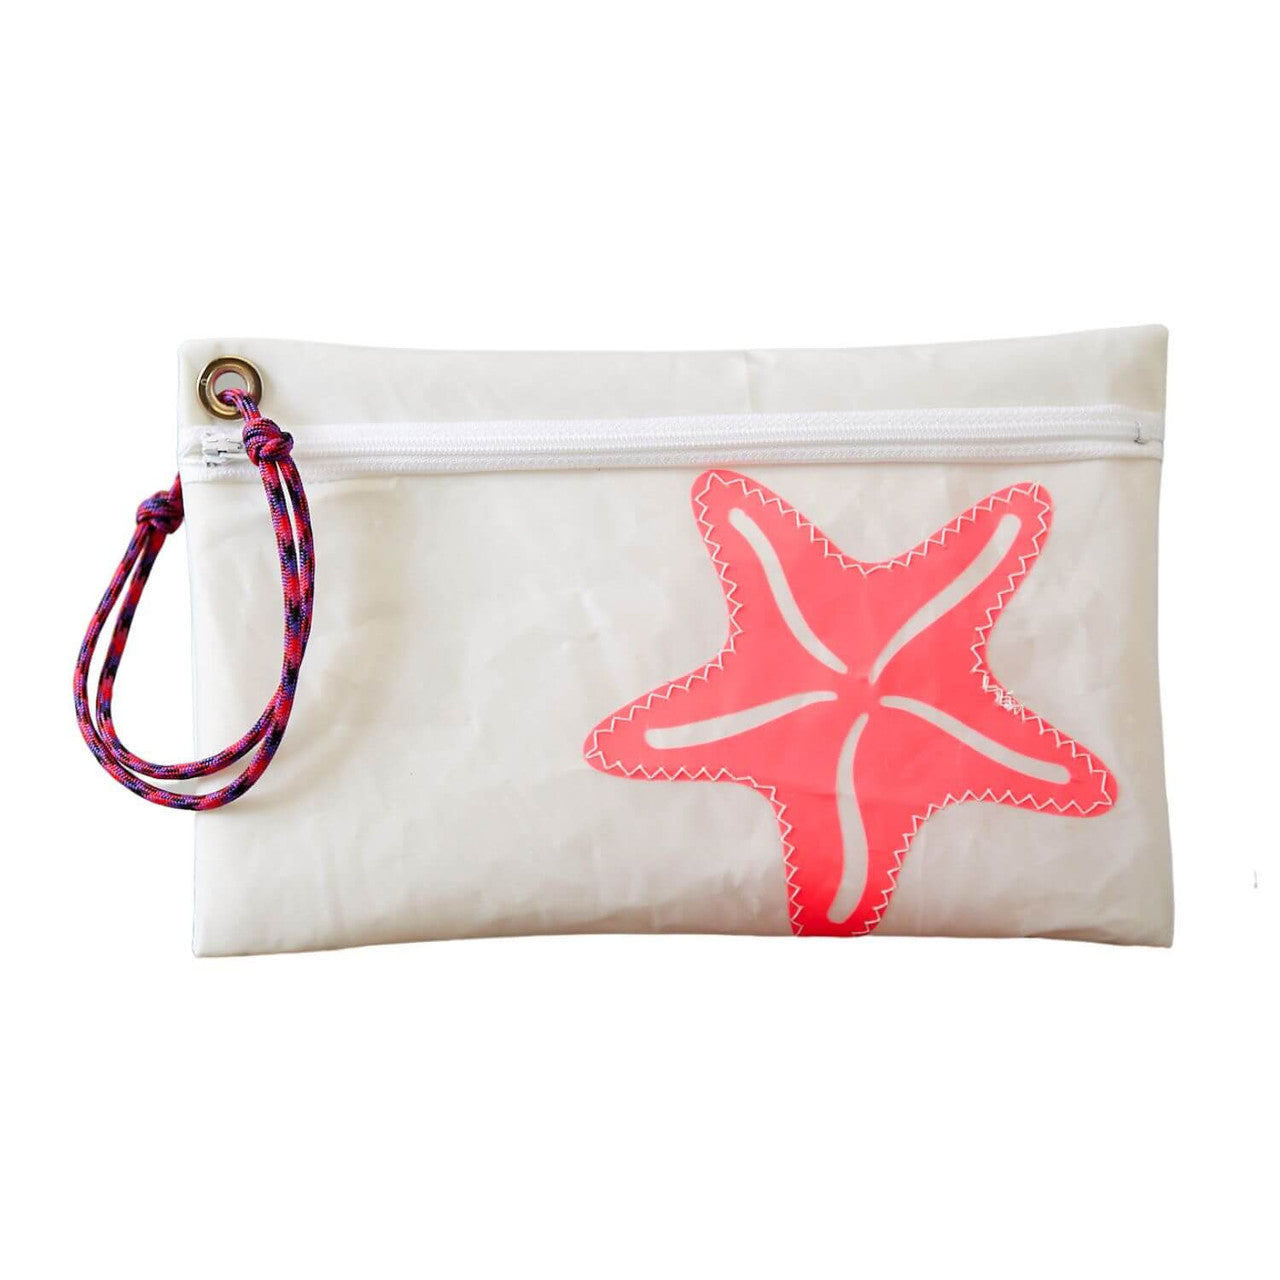 Recycled Sail Wristlet Handbags, Wallets & Cases New England Trading Co   